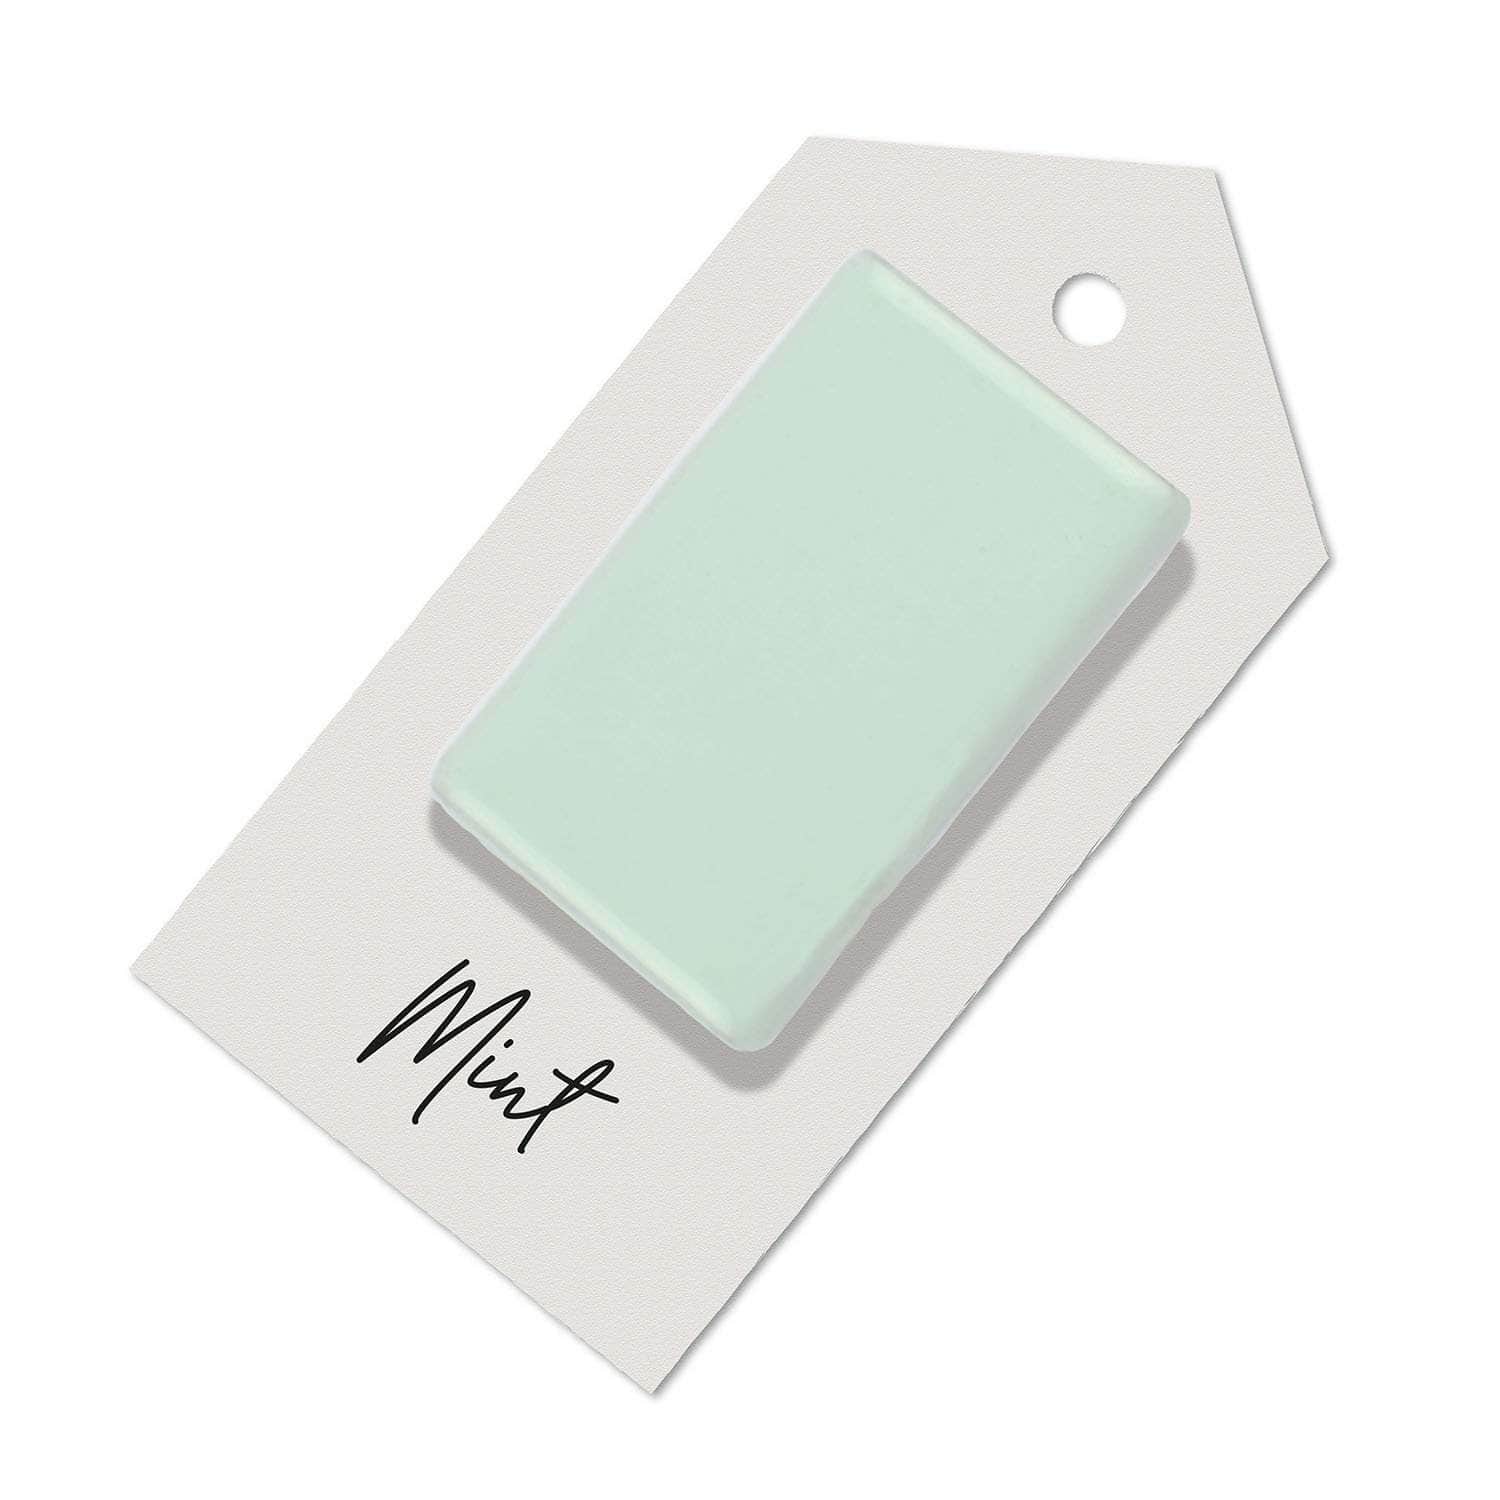 Mint Green sample for Aga range cooker re-enamelling & reconditioned cookers